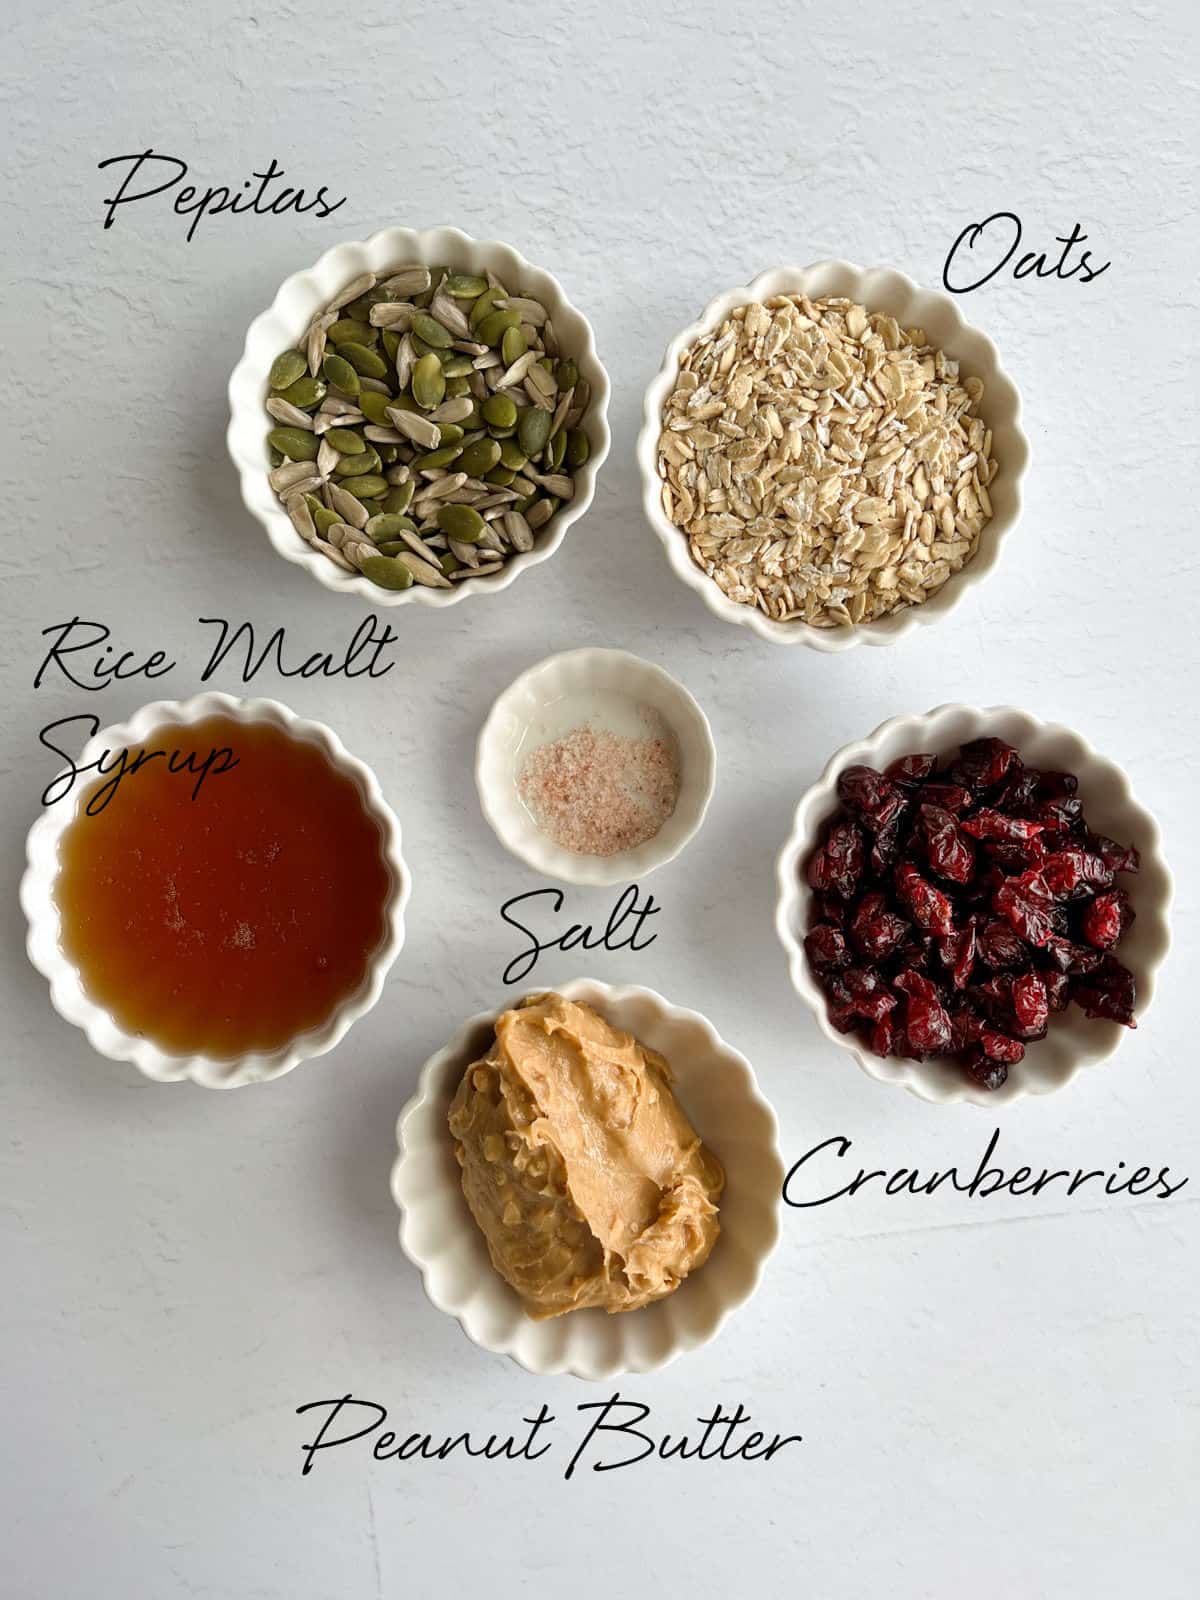 seeds, oats, a brown syrup, cranberries, salt and peanut butter in white bowls